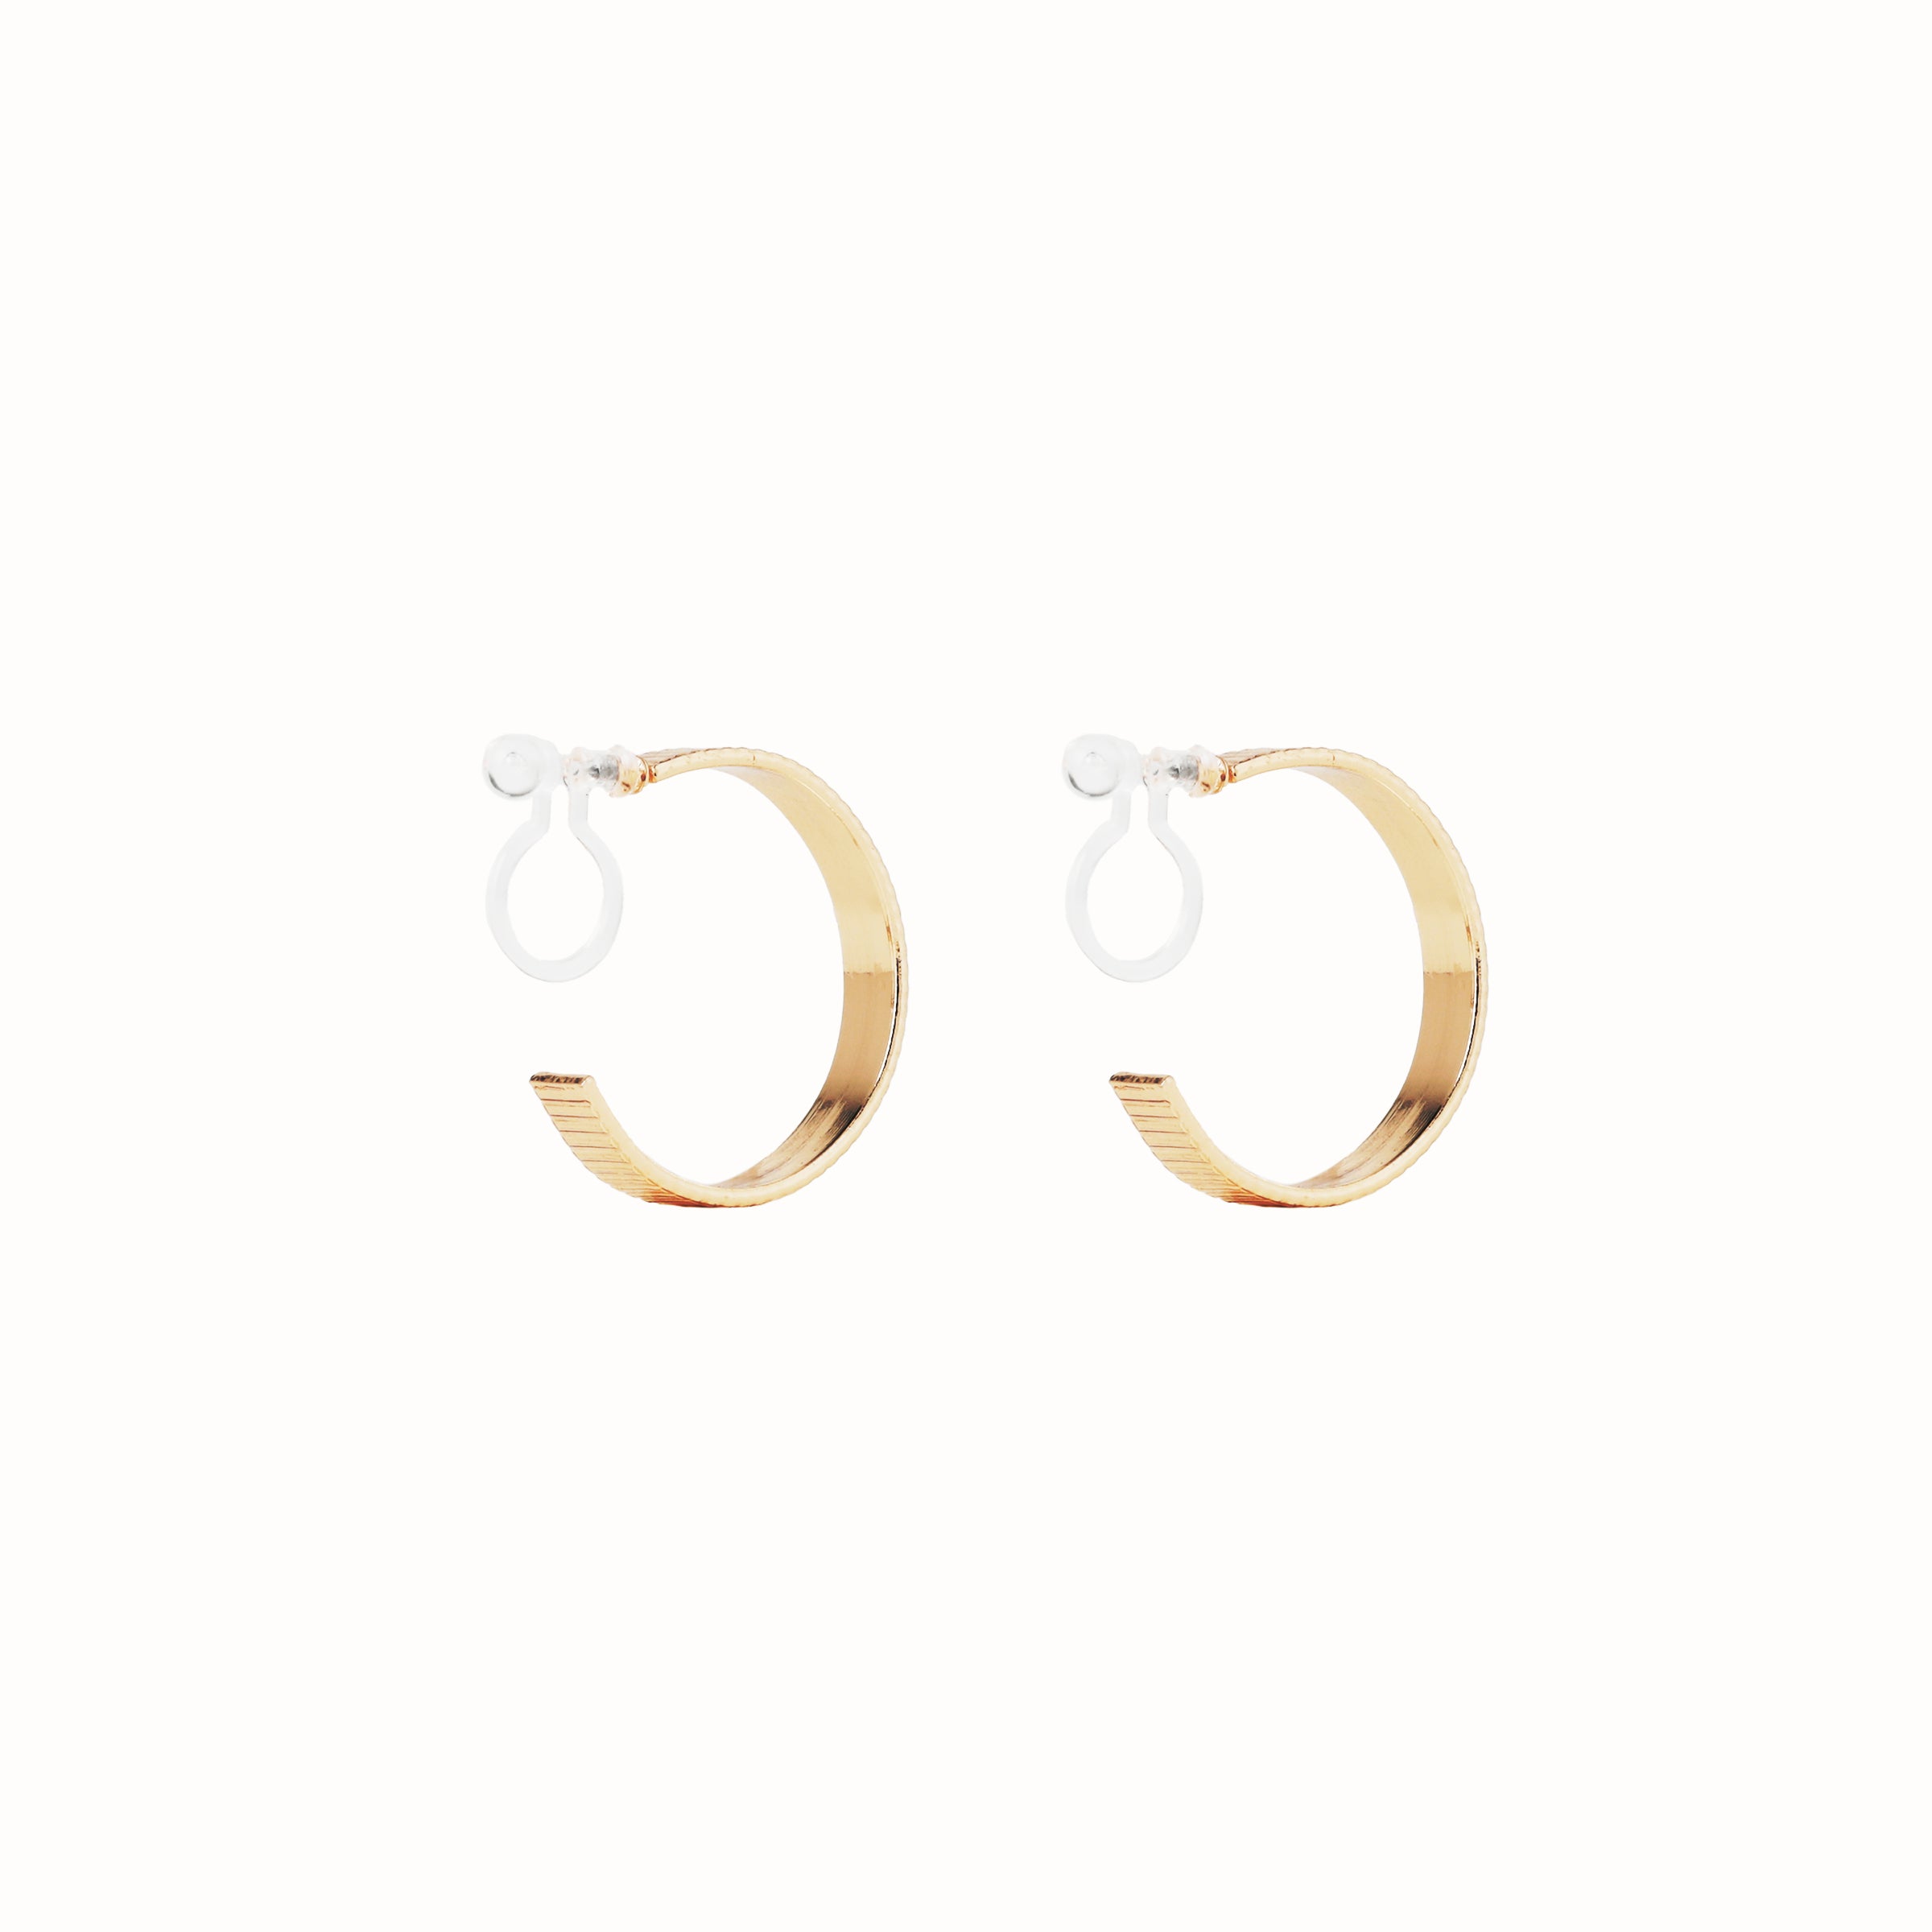 Image of the Pleated Hoop Clip On Earrings in Gold offer a resin clip-on closure for a secure and comfortable fit for a variety of ear sizes and sensitivities. With an average wear duration of 8-12 hours, these earrings are perfect for all-day wear. Please note that this listing is for a single pair.